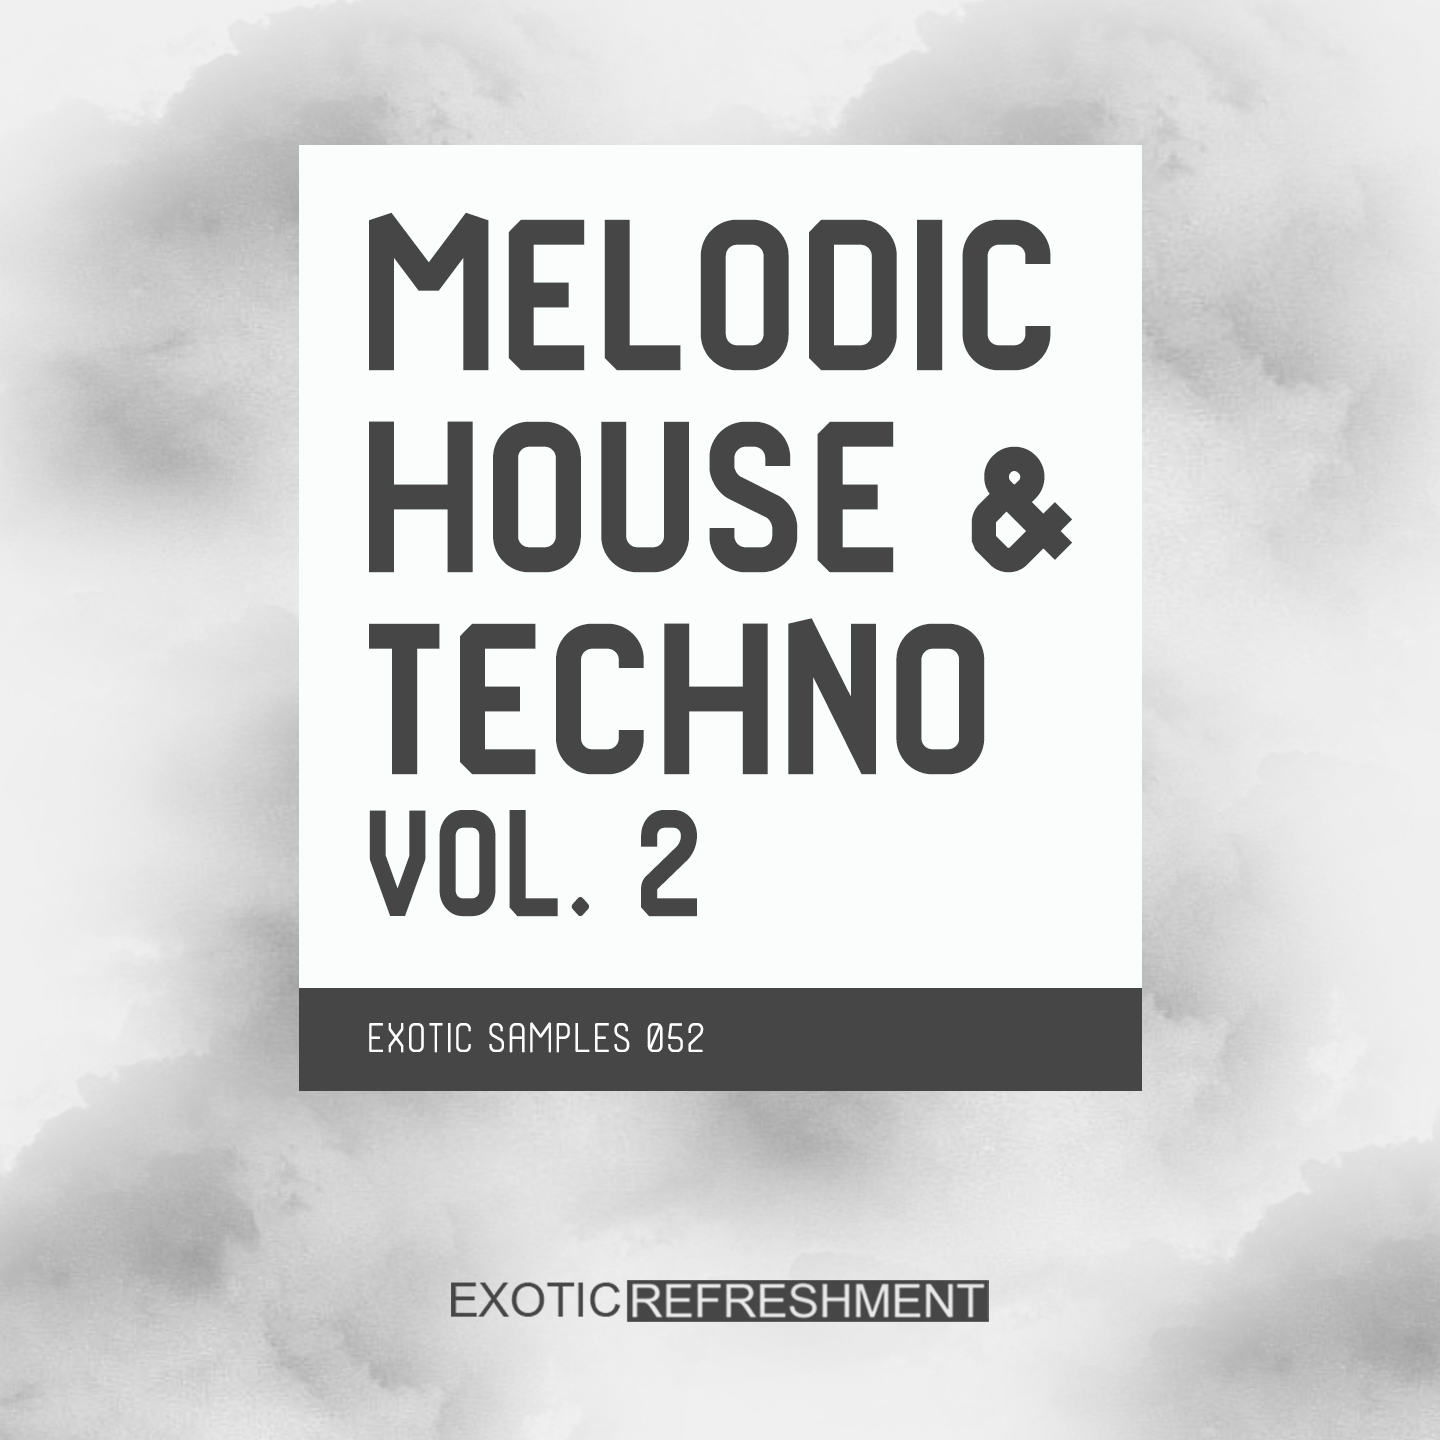 Melodic House & Techno vol. 2 - Sample Pack